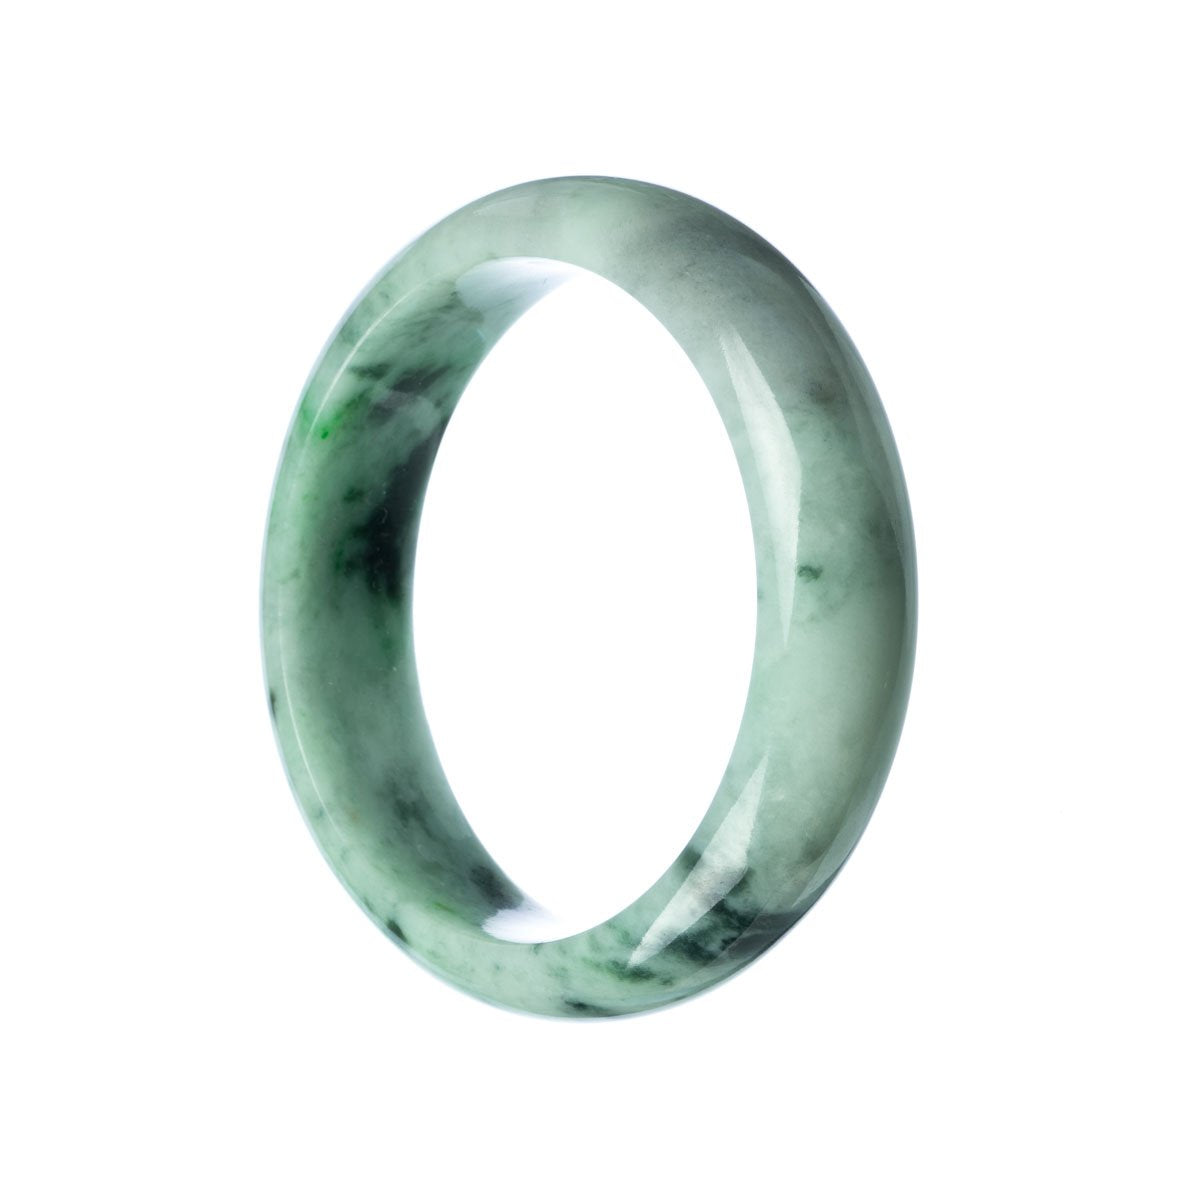 A close-up of a beautiful green Burma jade bracelet with a half moon shape, showcasing its genuine natural beauty. Perfect for adding a touch of elegance to any outfit.